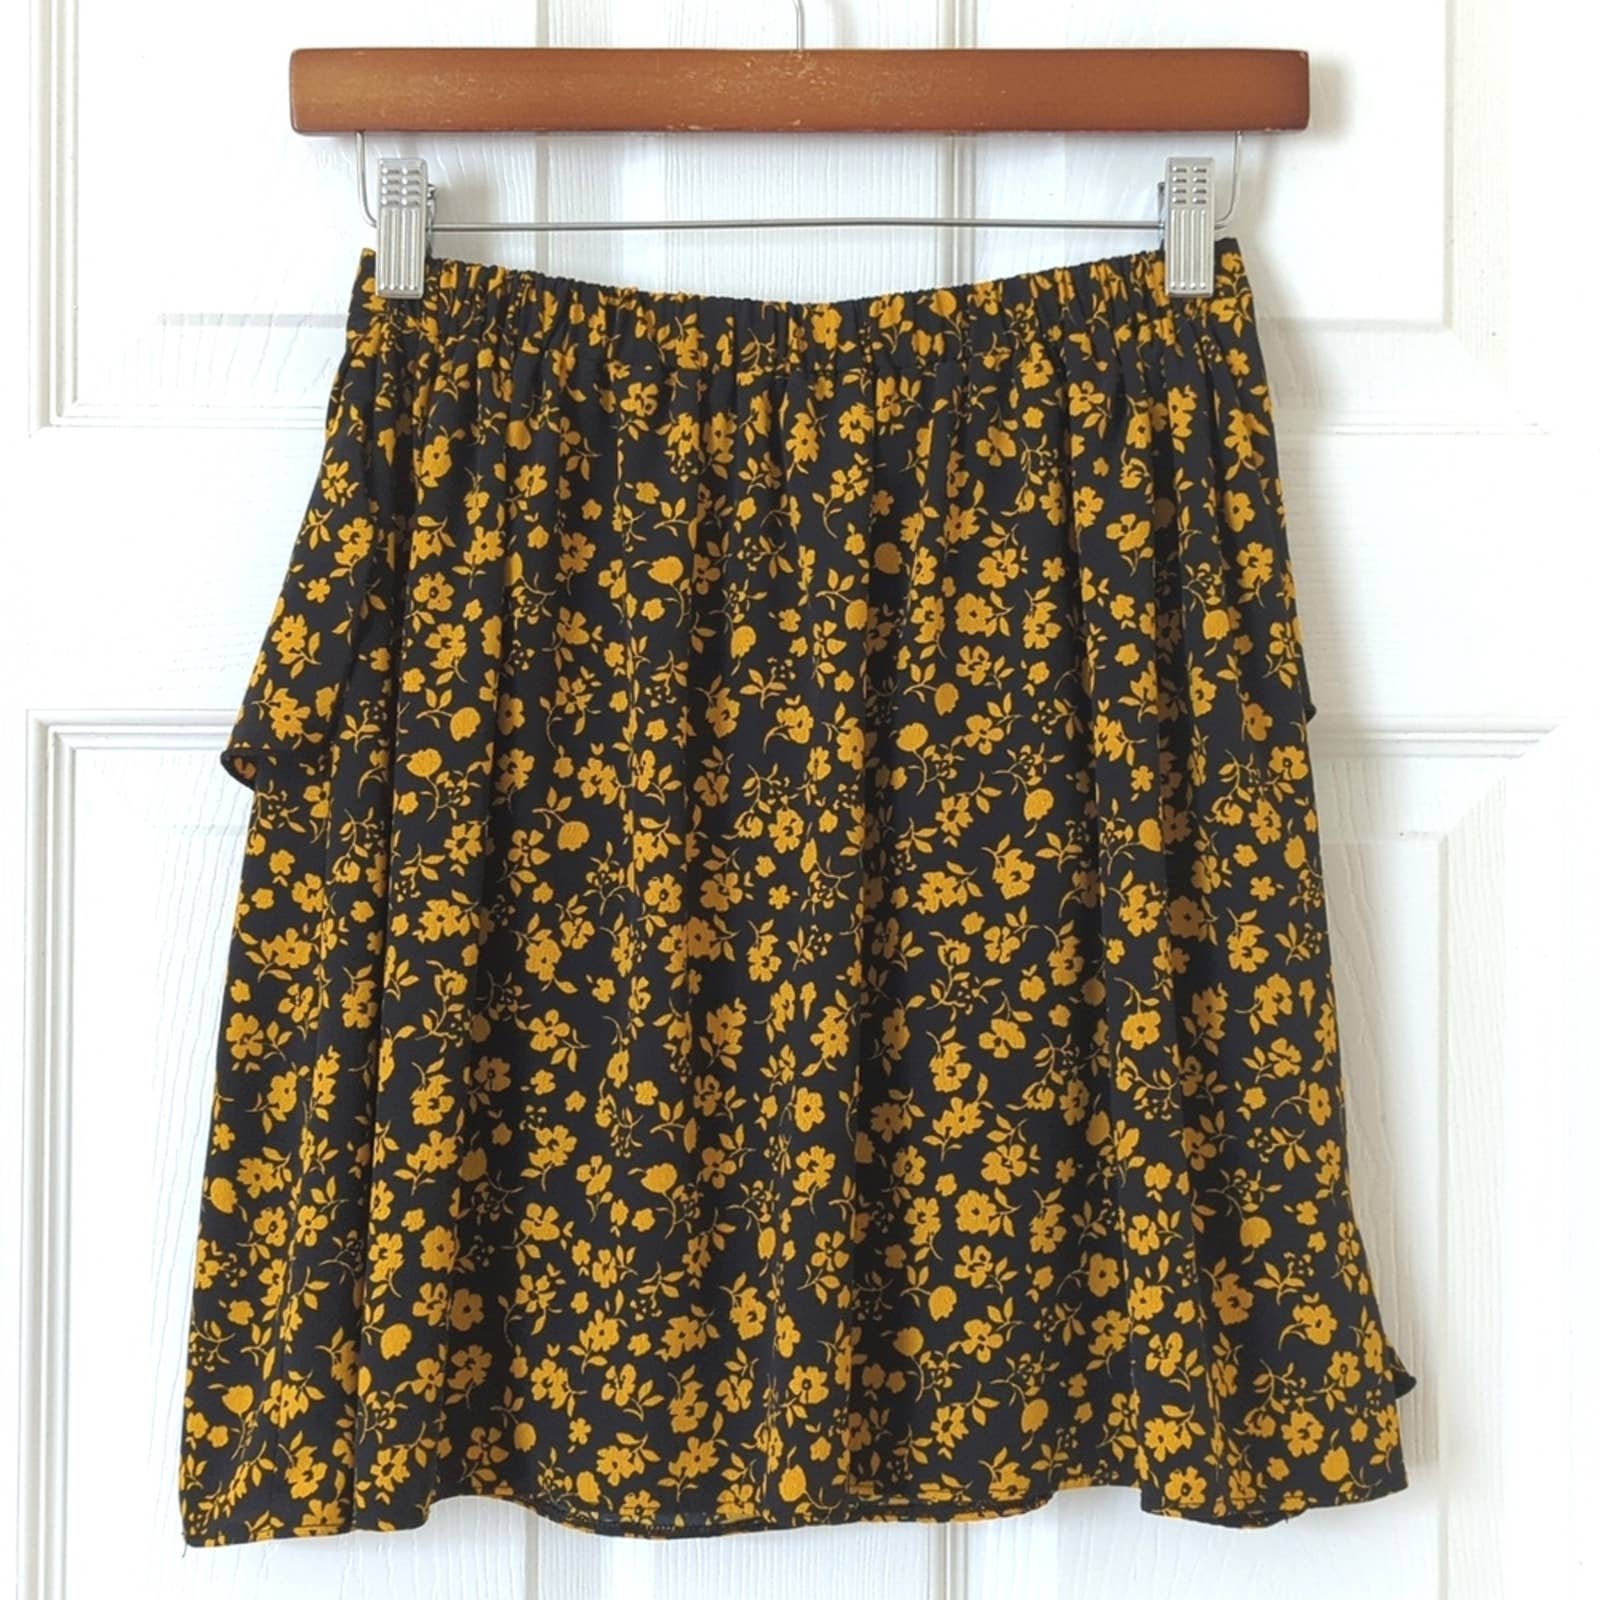 Stylish Topshop Floral Ruffle Layered High Waisted A-Line Mini Skirt Black Yellow Small oXcwxafsG well sale